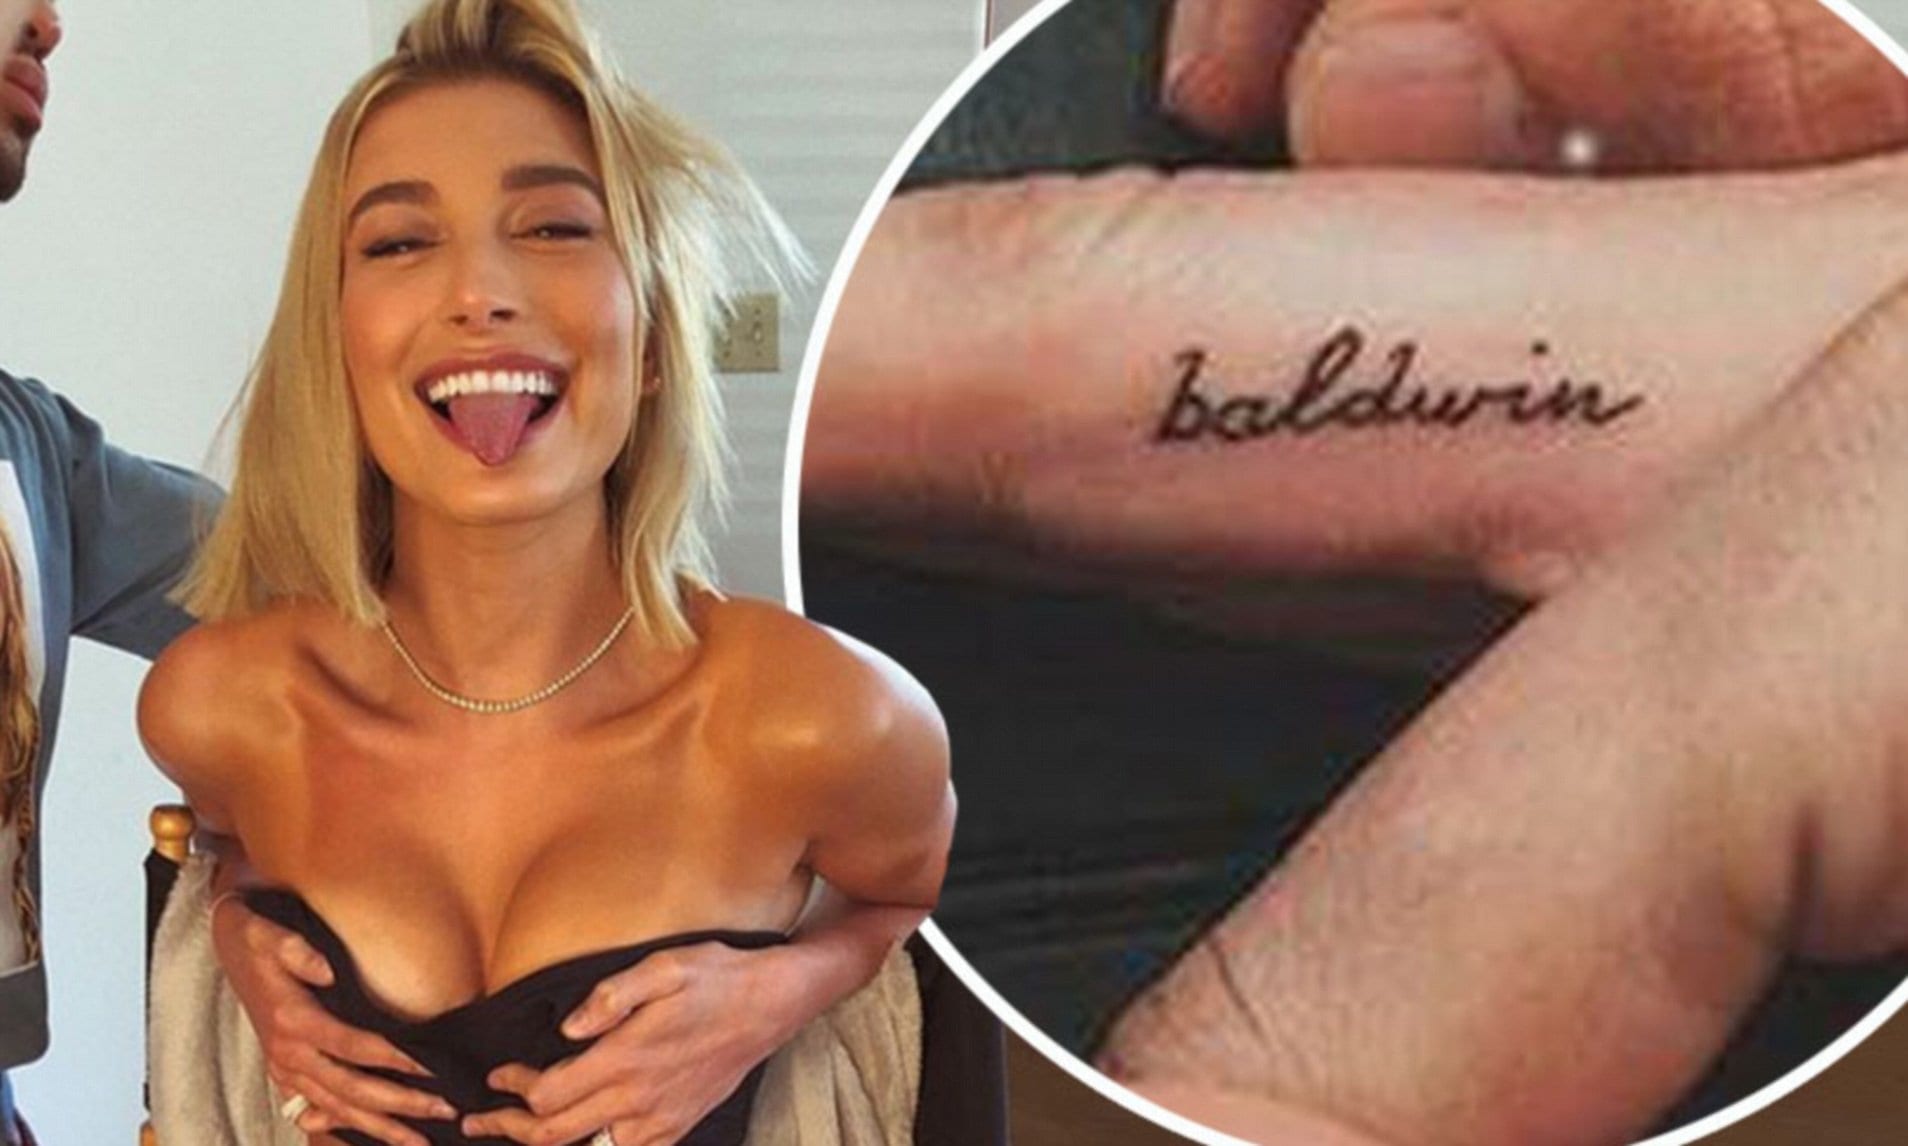 Hailey Baldwin Reveals The Tattoo She Regrets Getting The Most